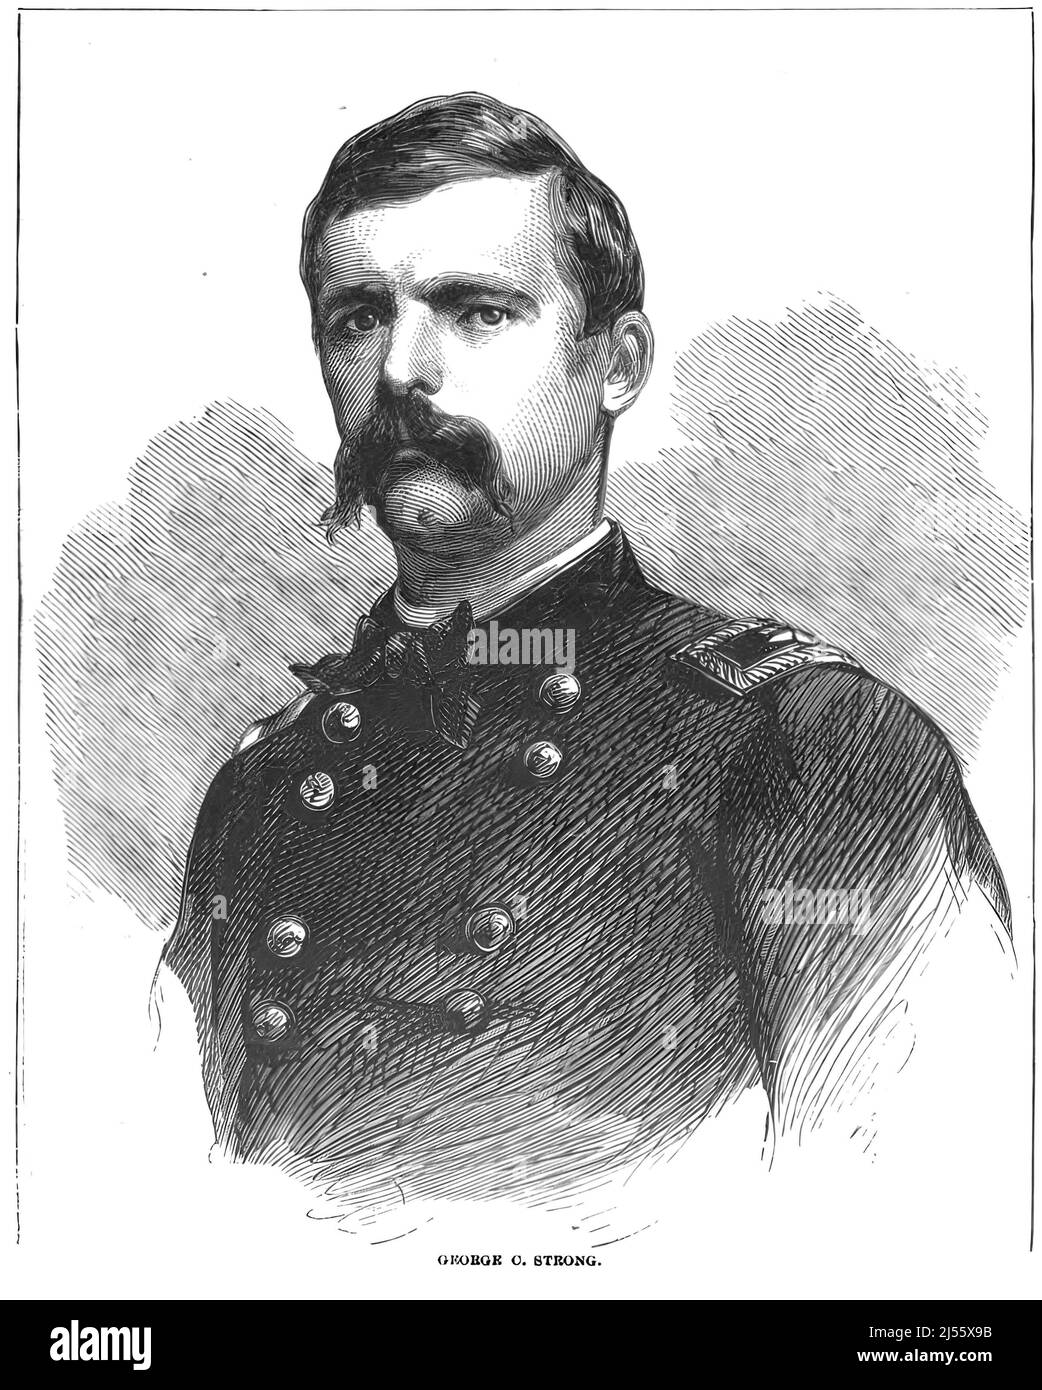 Portrait of George Crockett Strong, Union Army General in the American Civil War. 19th century illustration Stock Photo